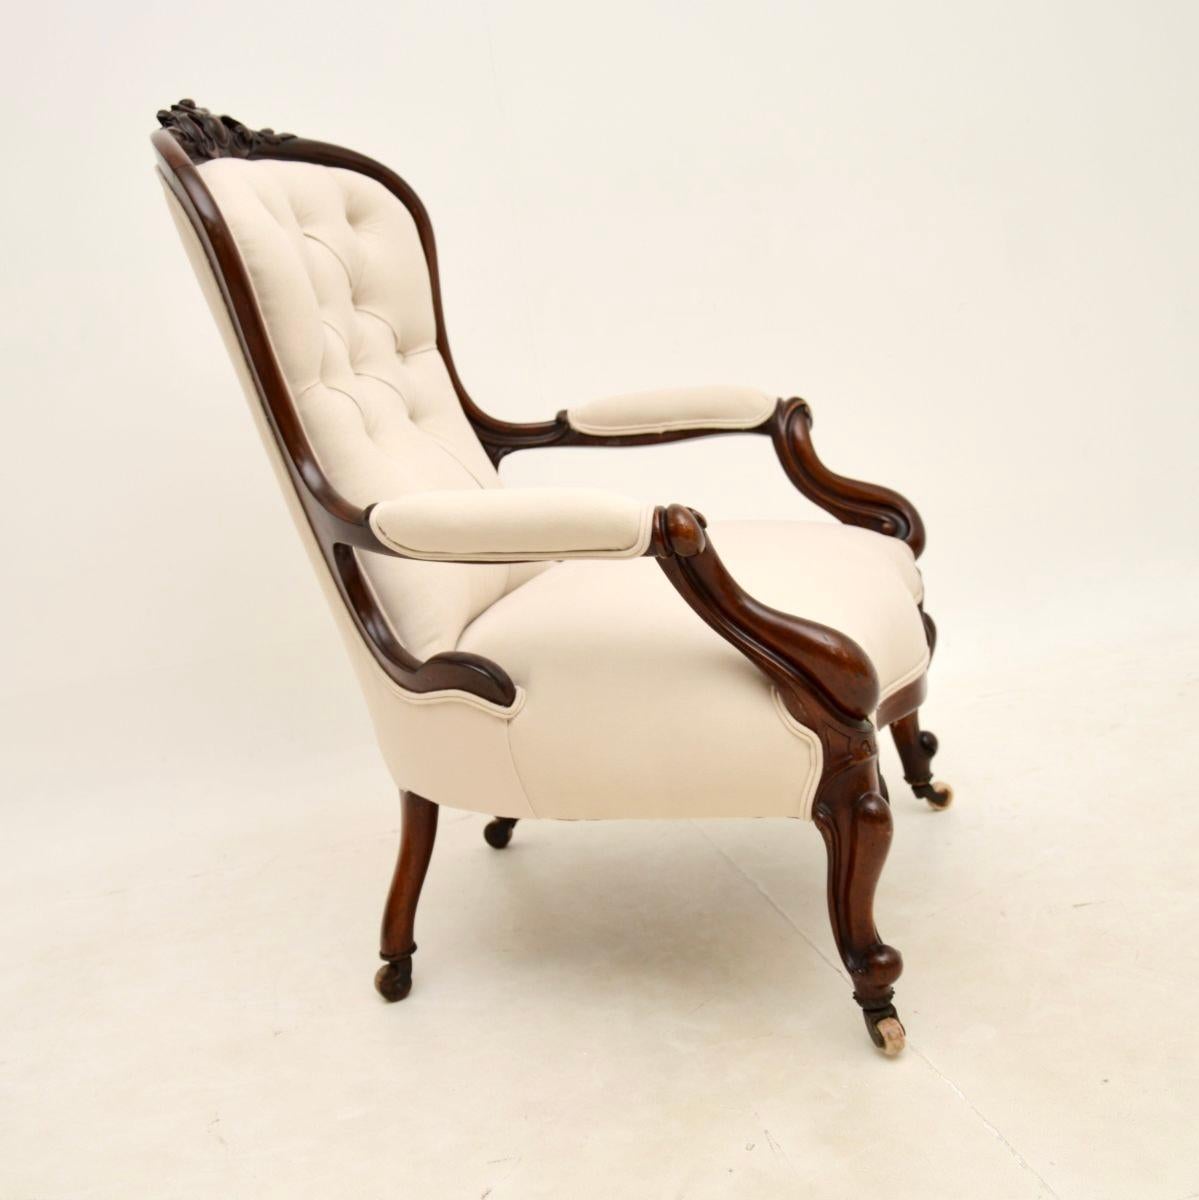 Late Victorian Antique Victorian Spoon Back Armchair For Sale